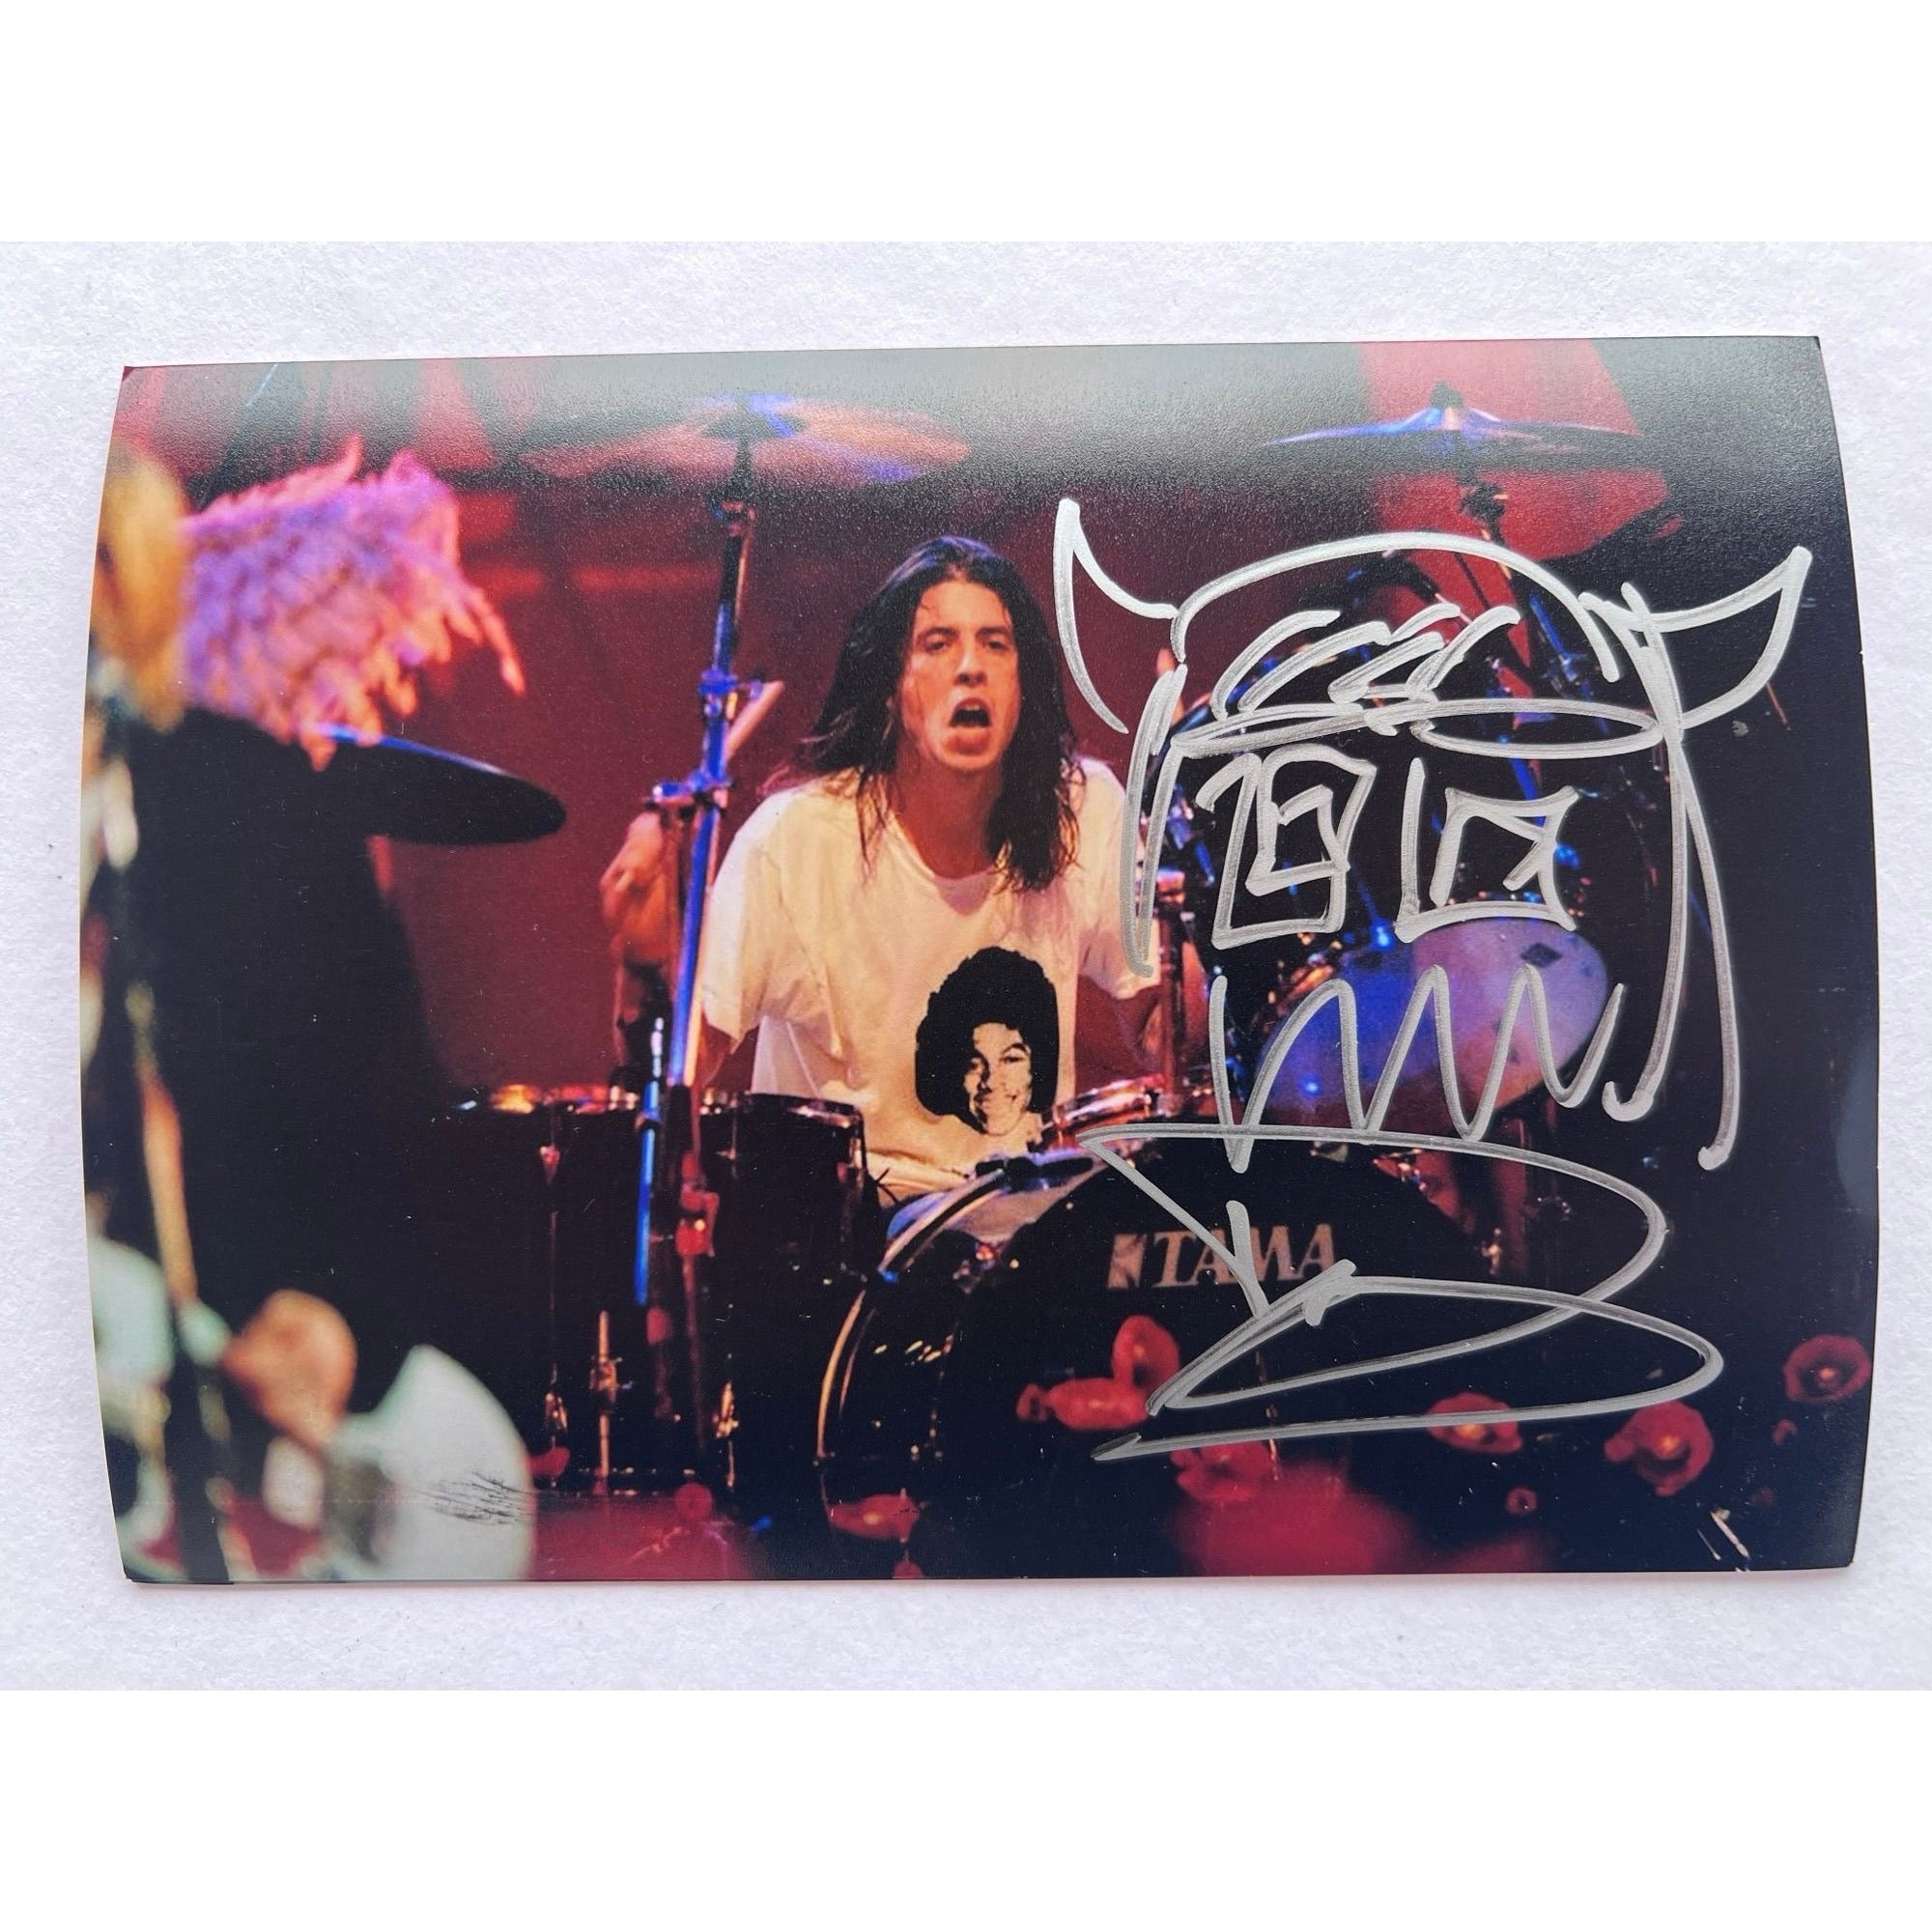 David Grohl Foo Fighters Nirvana 5x7 photograph signed with proof